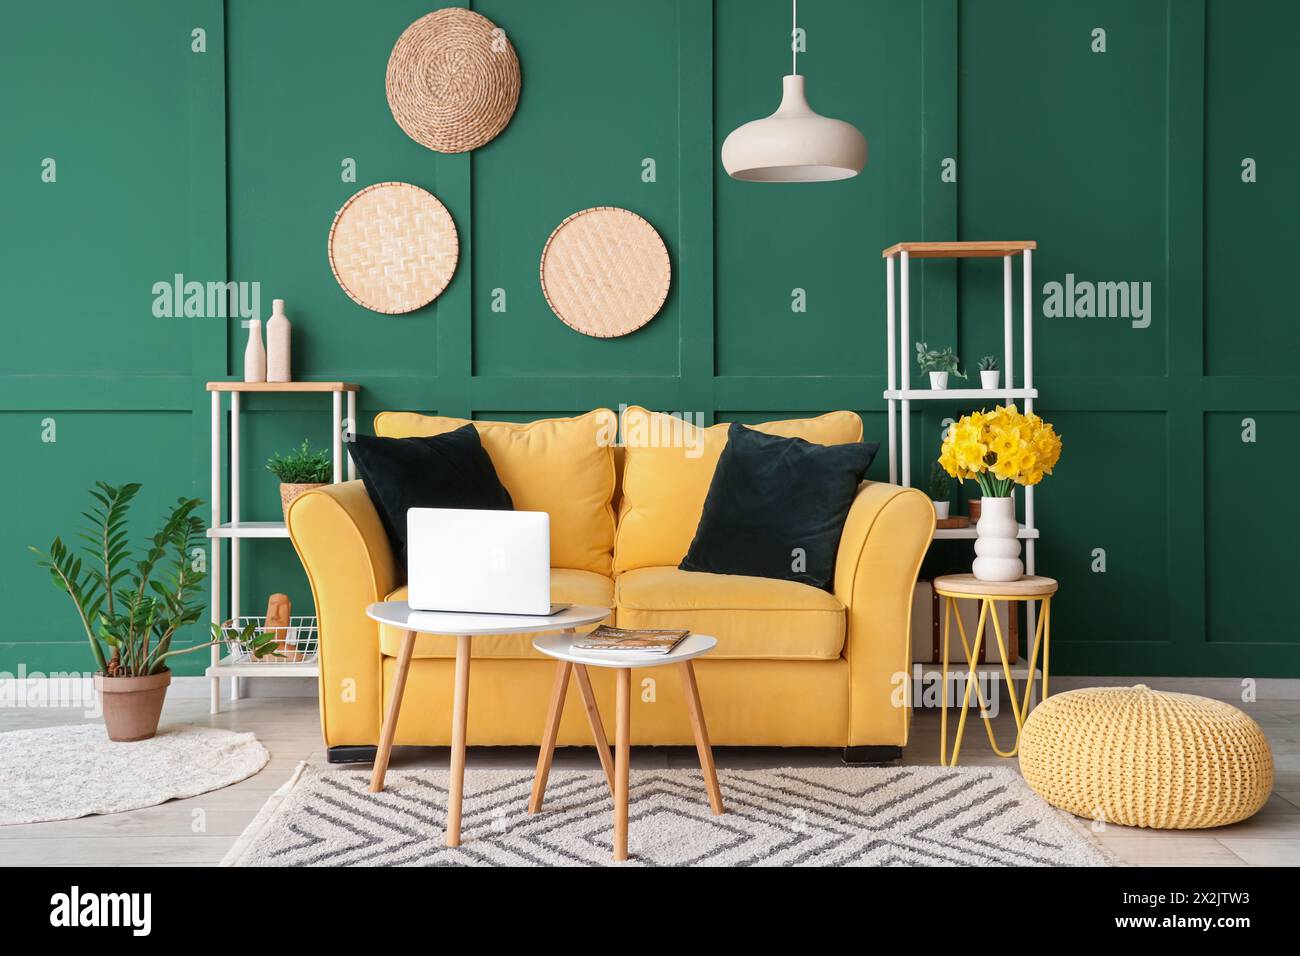 Stylish interior of green living room with yellow sofa, coffee tables, laptop and bouquet of narcissus flowers Stock Photo